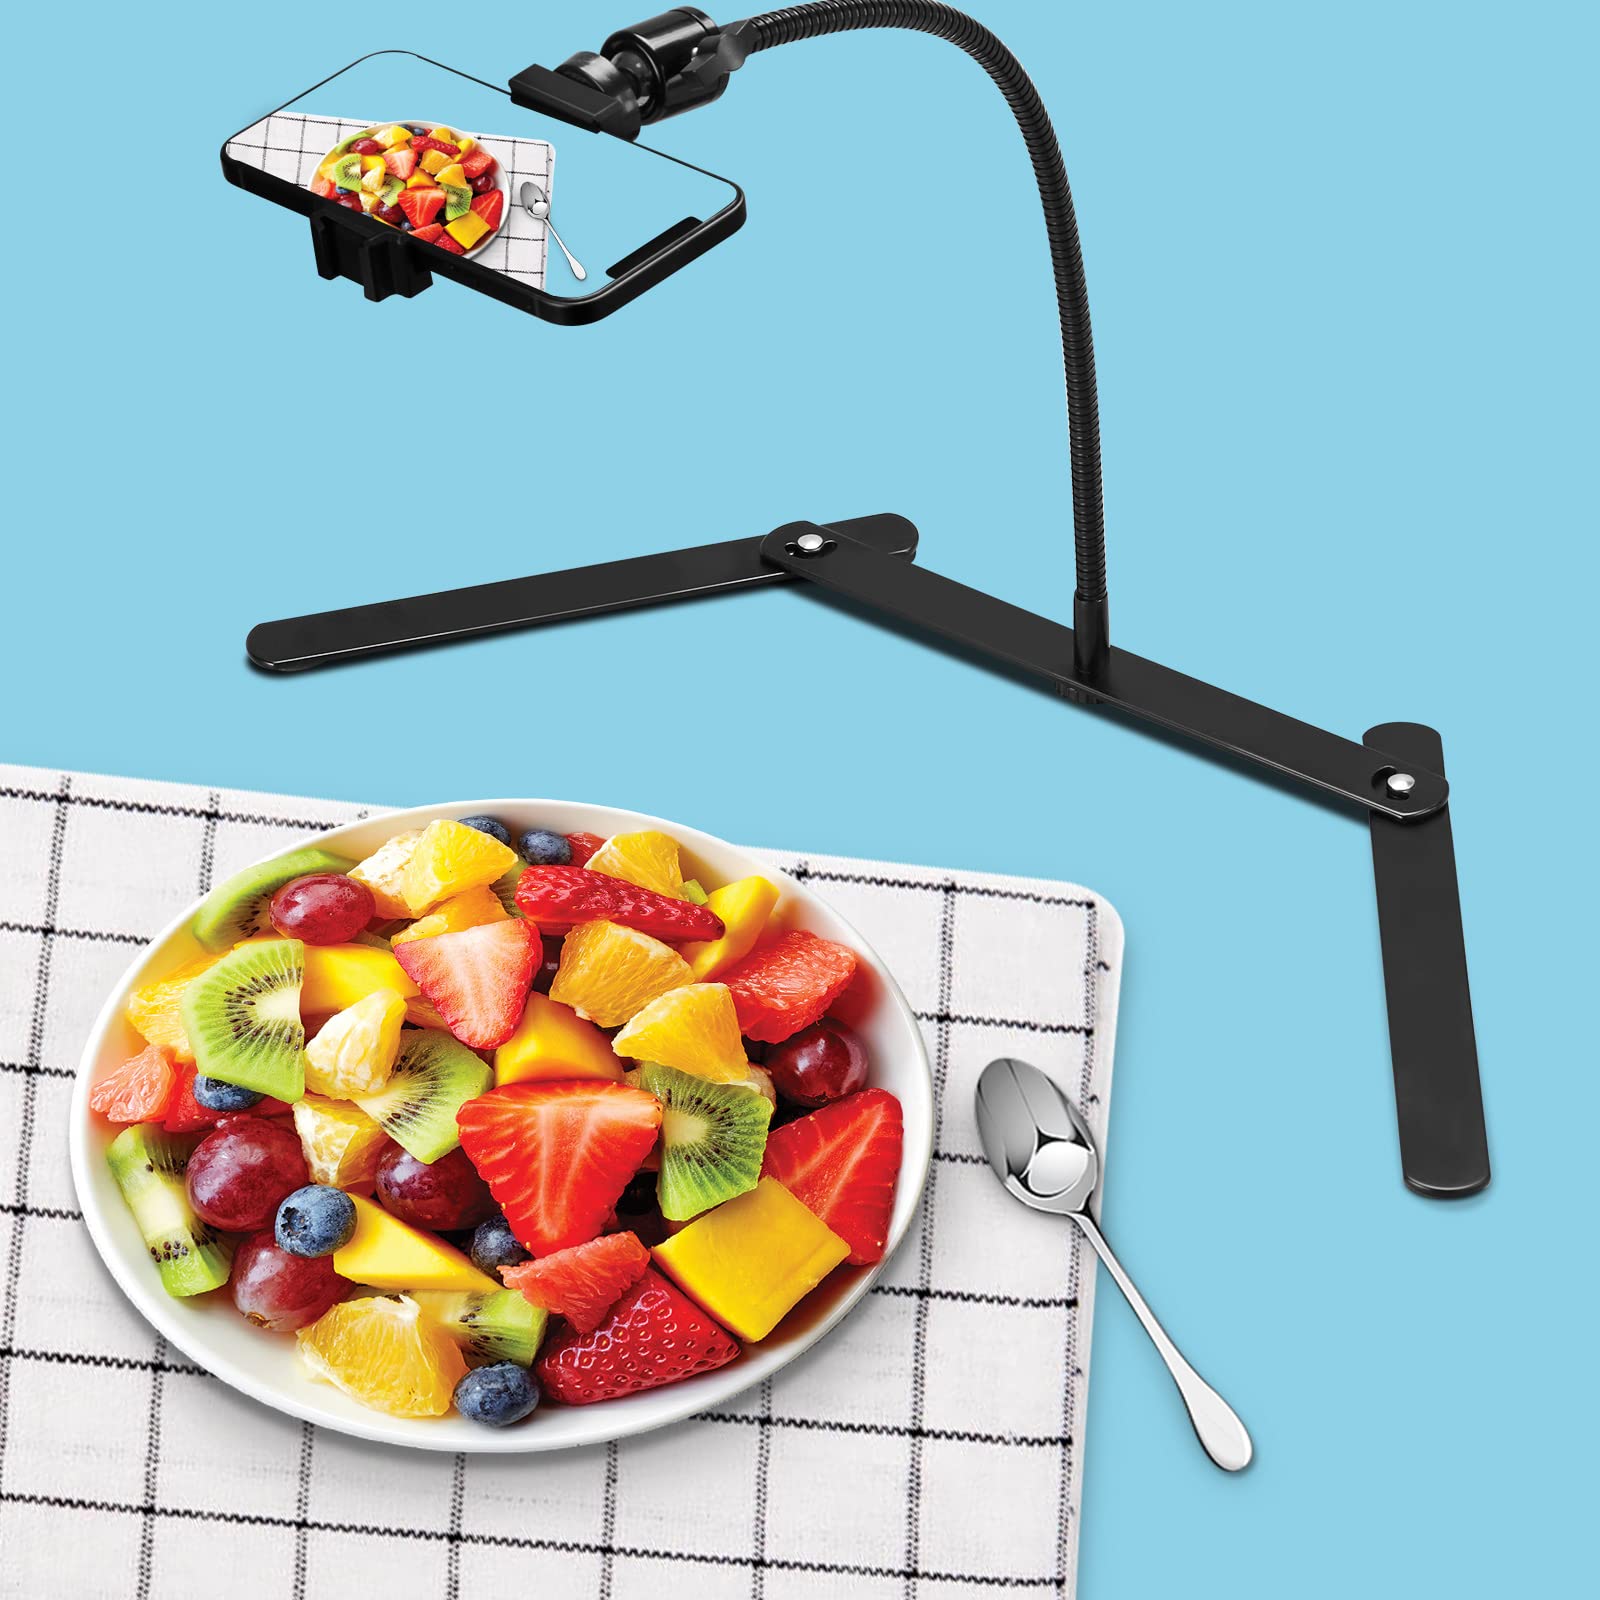 MAKKIWAI Phone Stand for Recording, Phone Tripod Adjustable and Solid, Overhead Phone Mount, Fixable Gooseneck Phone Holder for Video Recording, Online Teaching, Cookie Decorating, Live Streaming